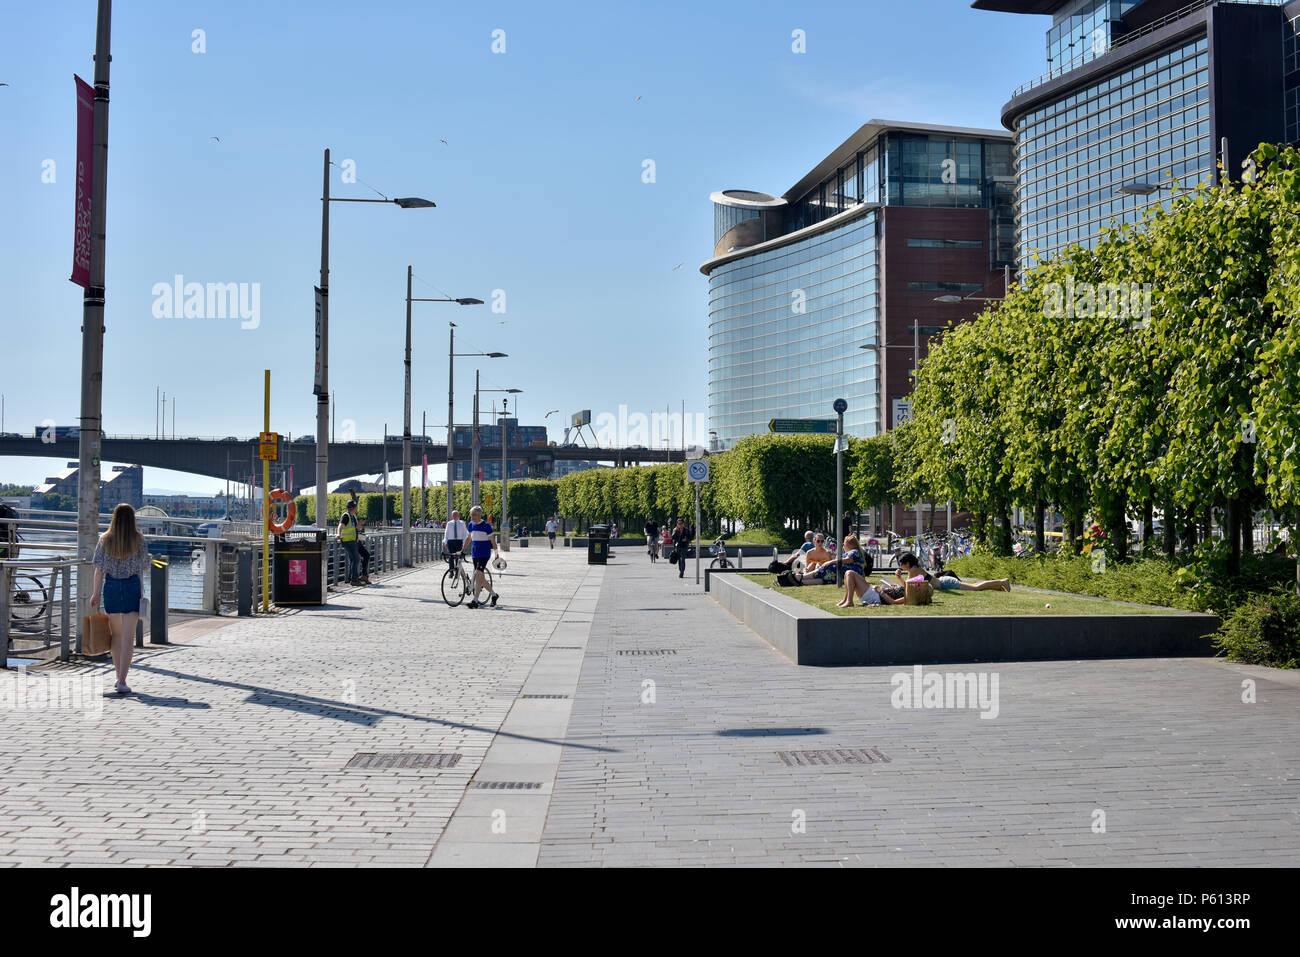 Glasgow, UK. 27th Jun, 2018. UK Weather: People on the banks of the River Clyde enjoying the sunny weather. Credit: Tony Clerkson/Alamy Live News Stock Photo